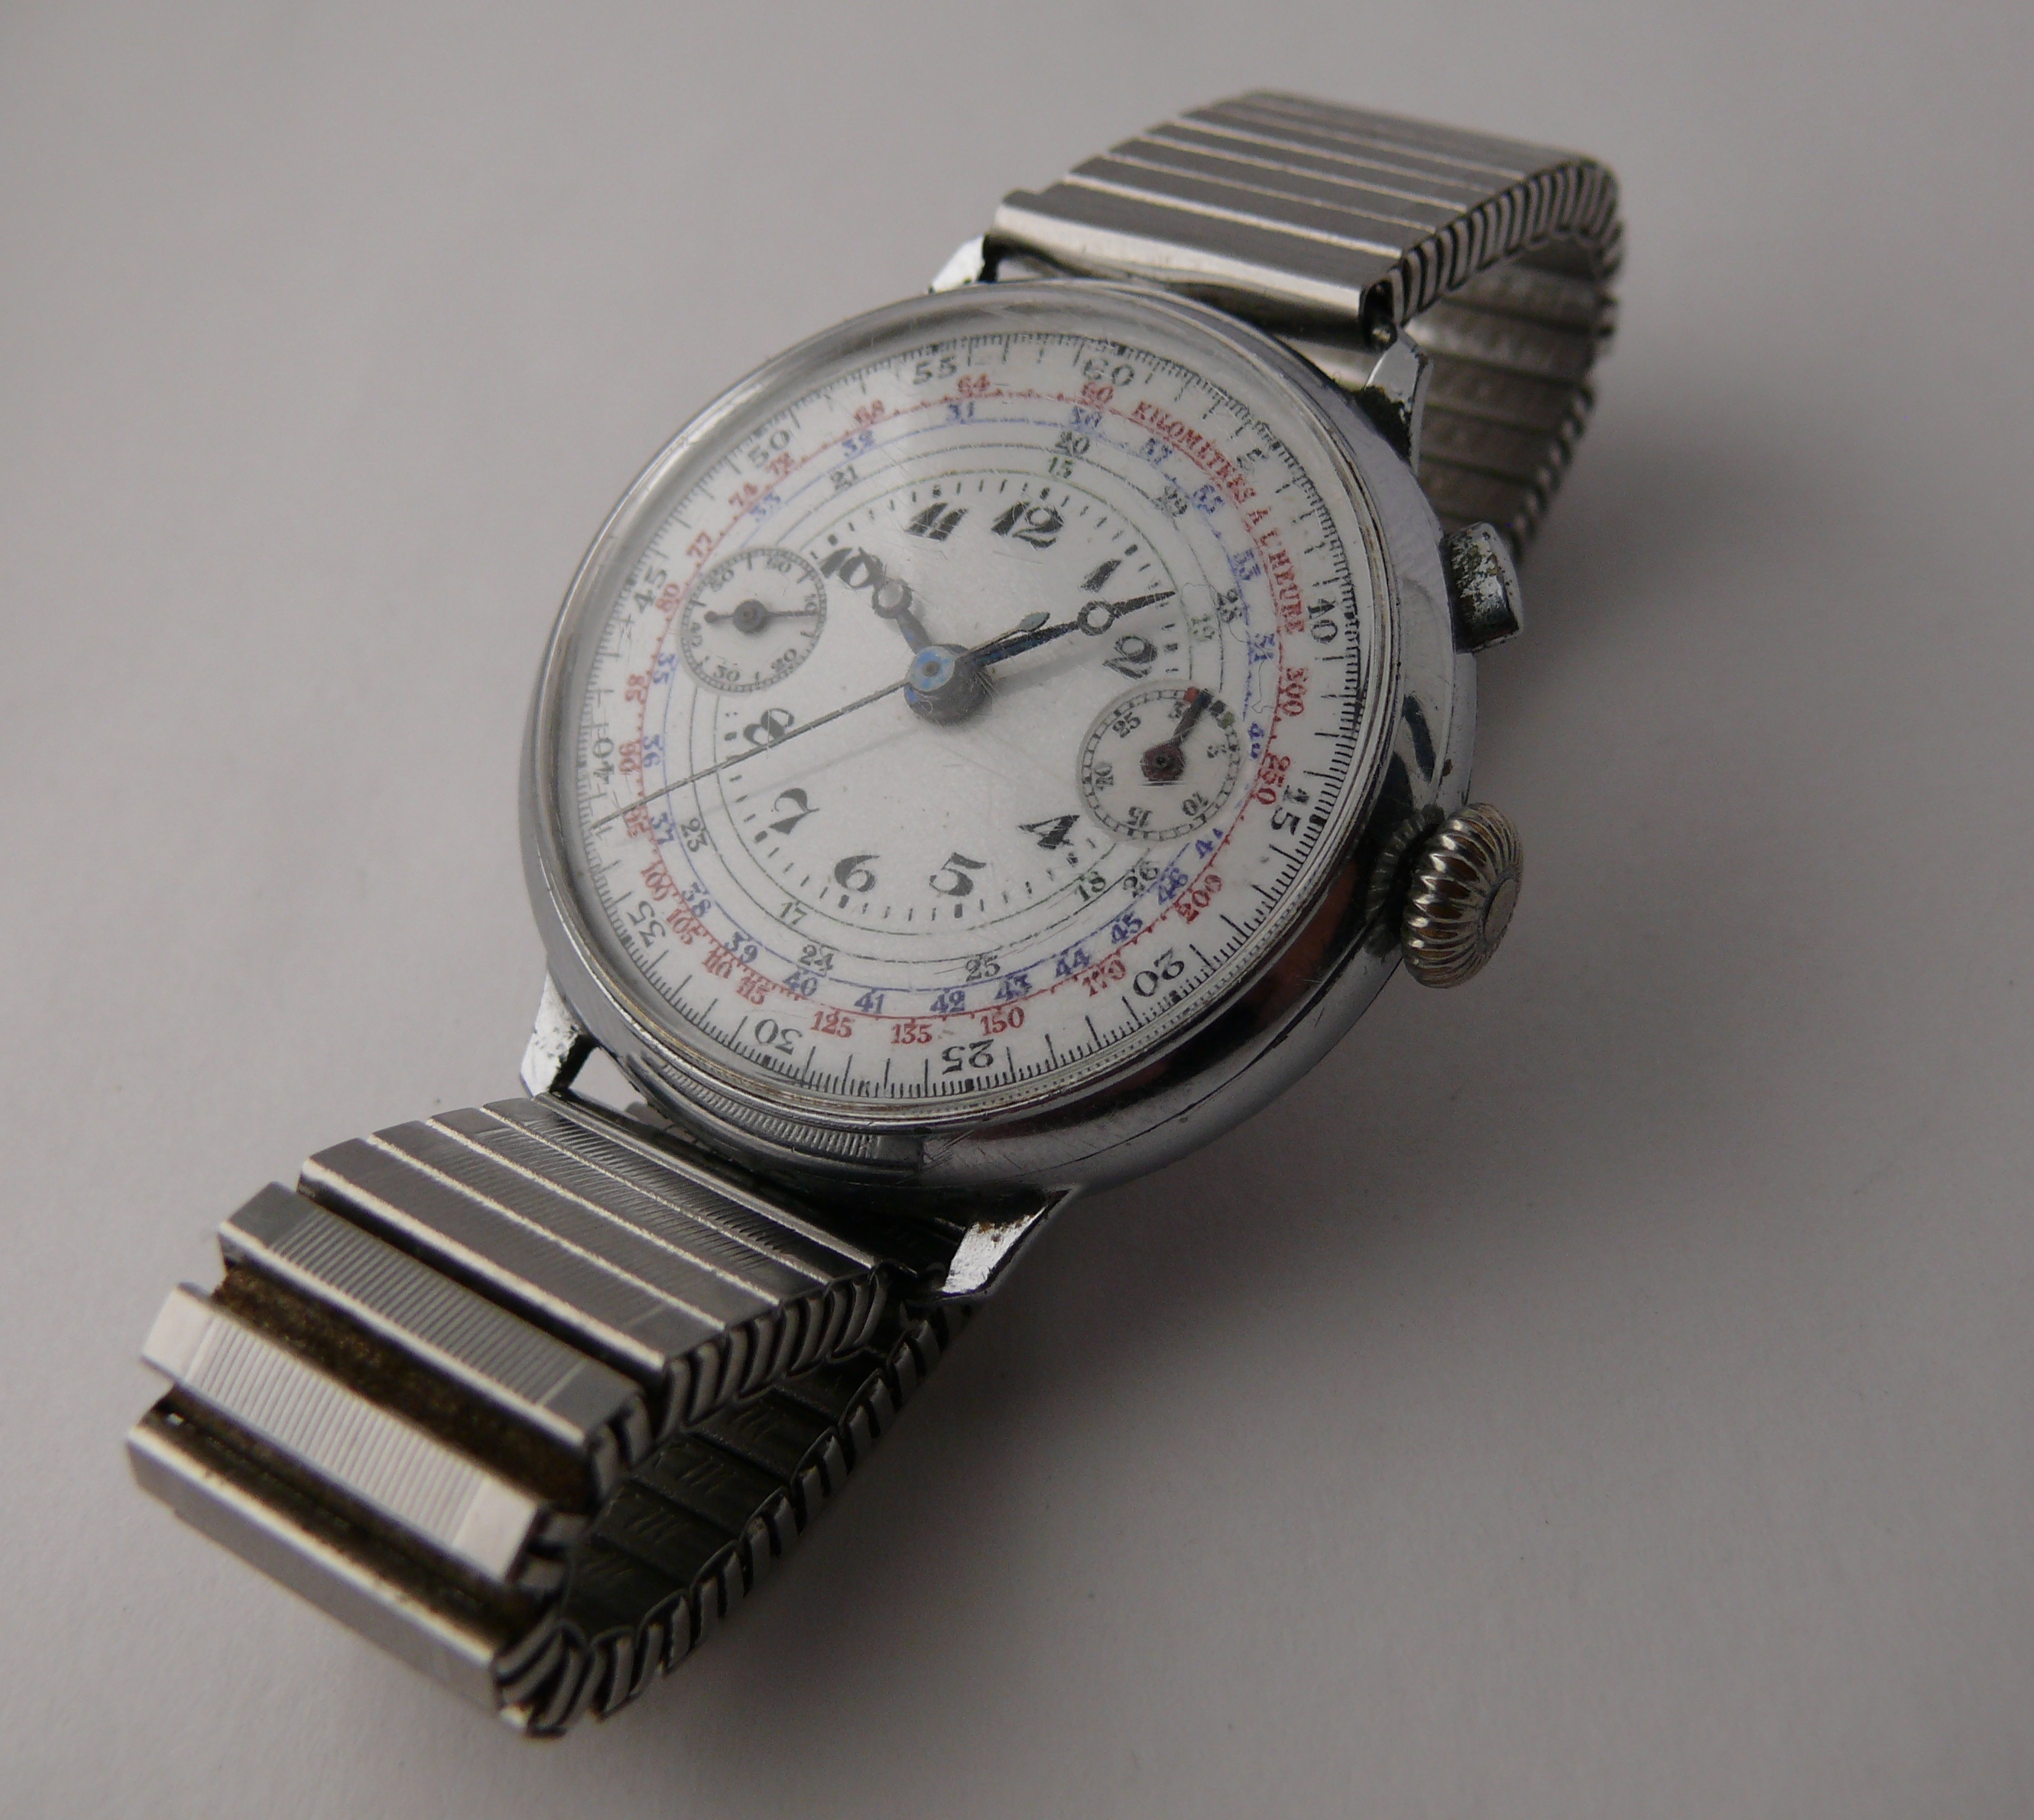 Vintage Porcelain Enamel Dial Monopusher Chronograph Wristwatch Circa 1940s, well preserved - Image 2 of 12